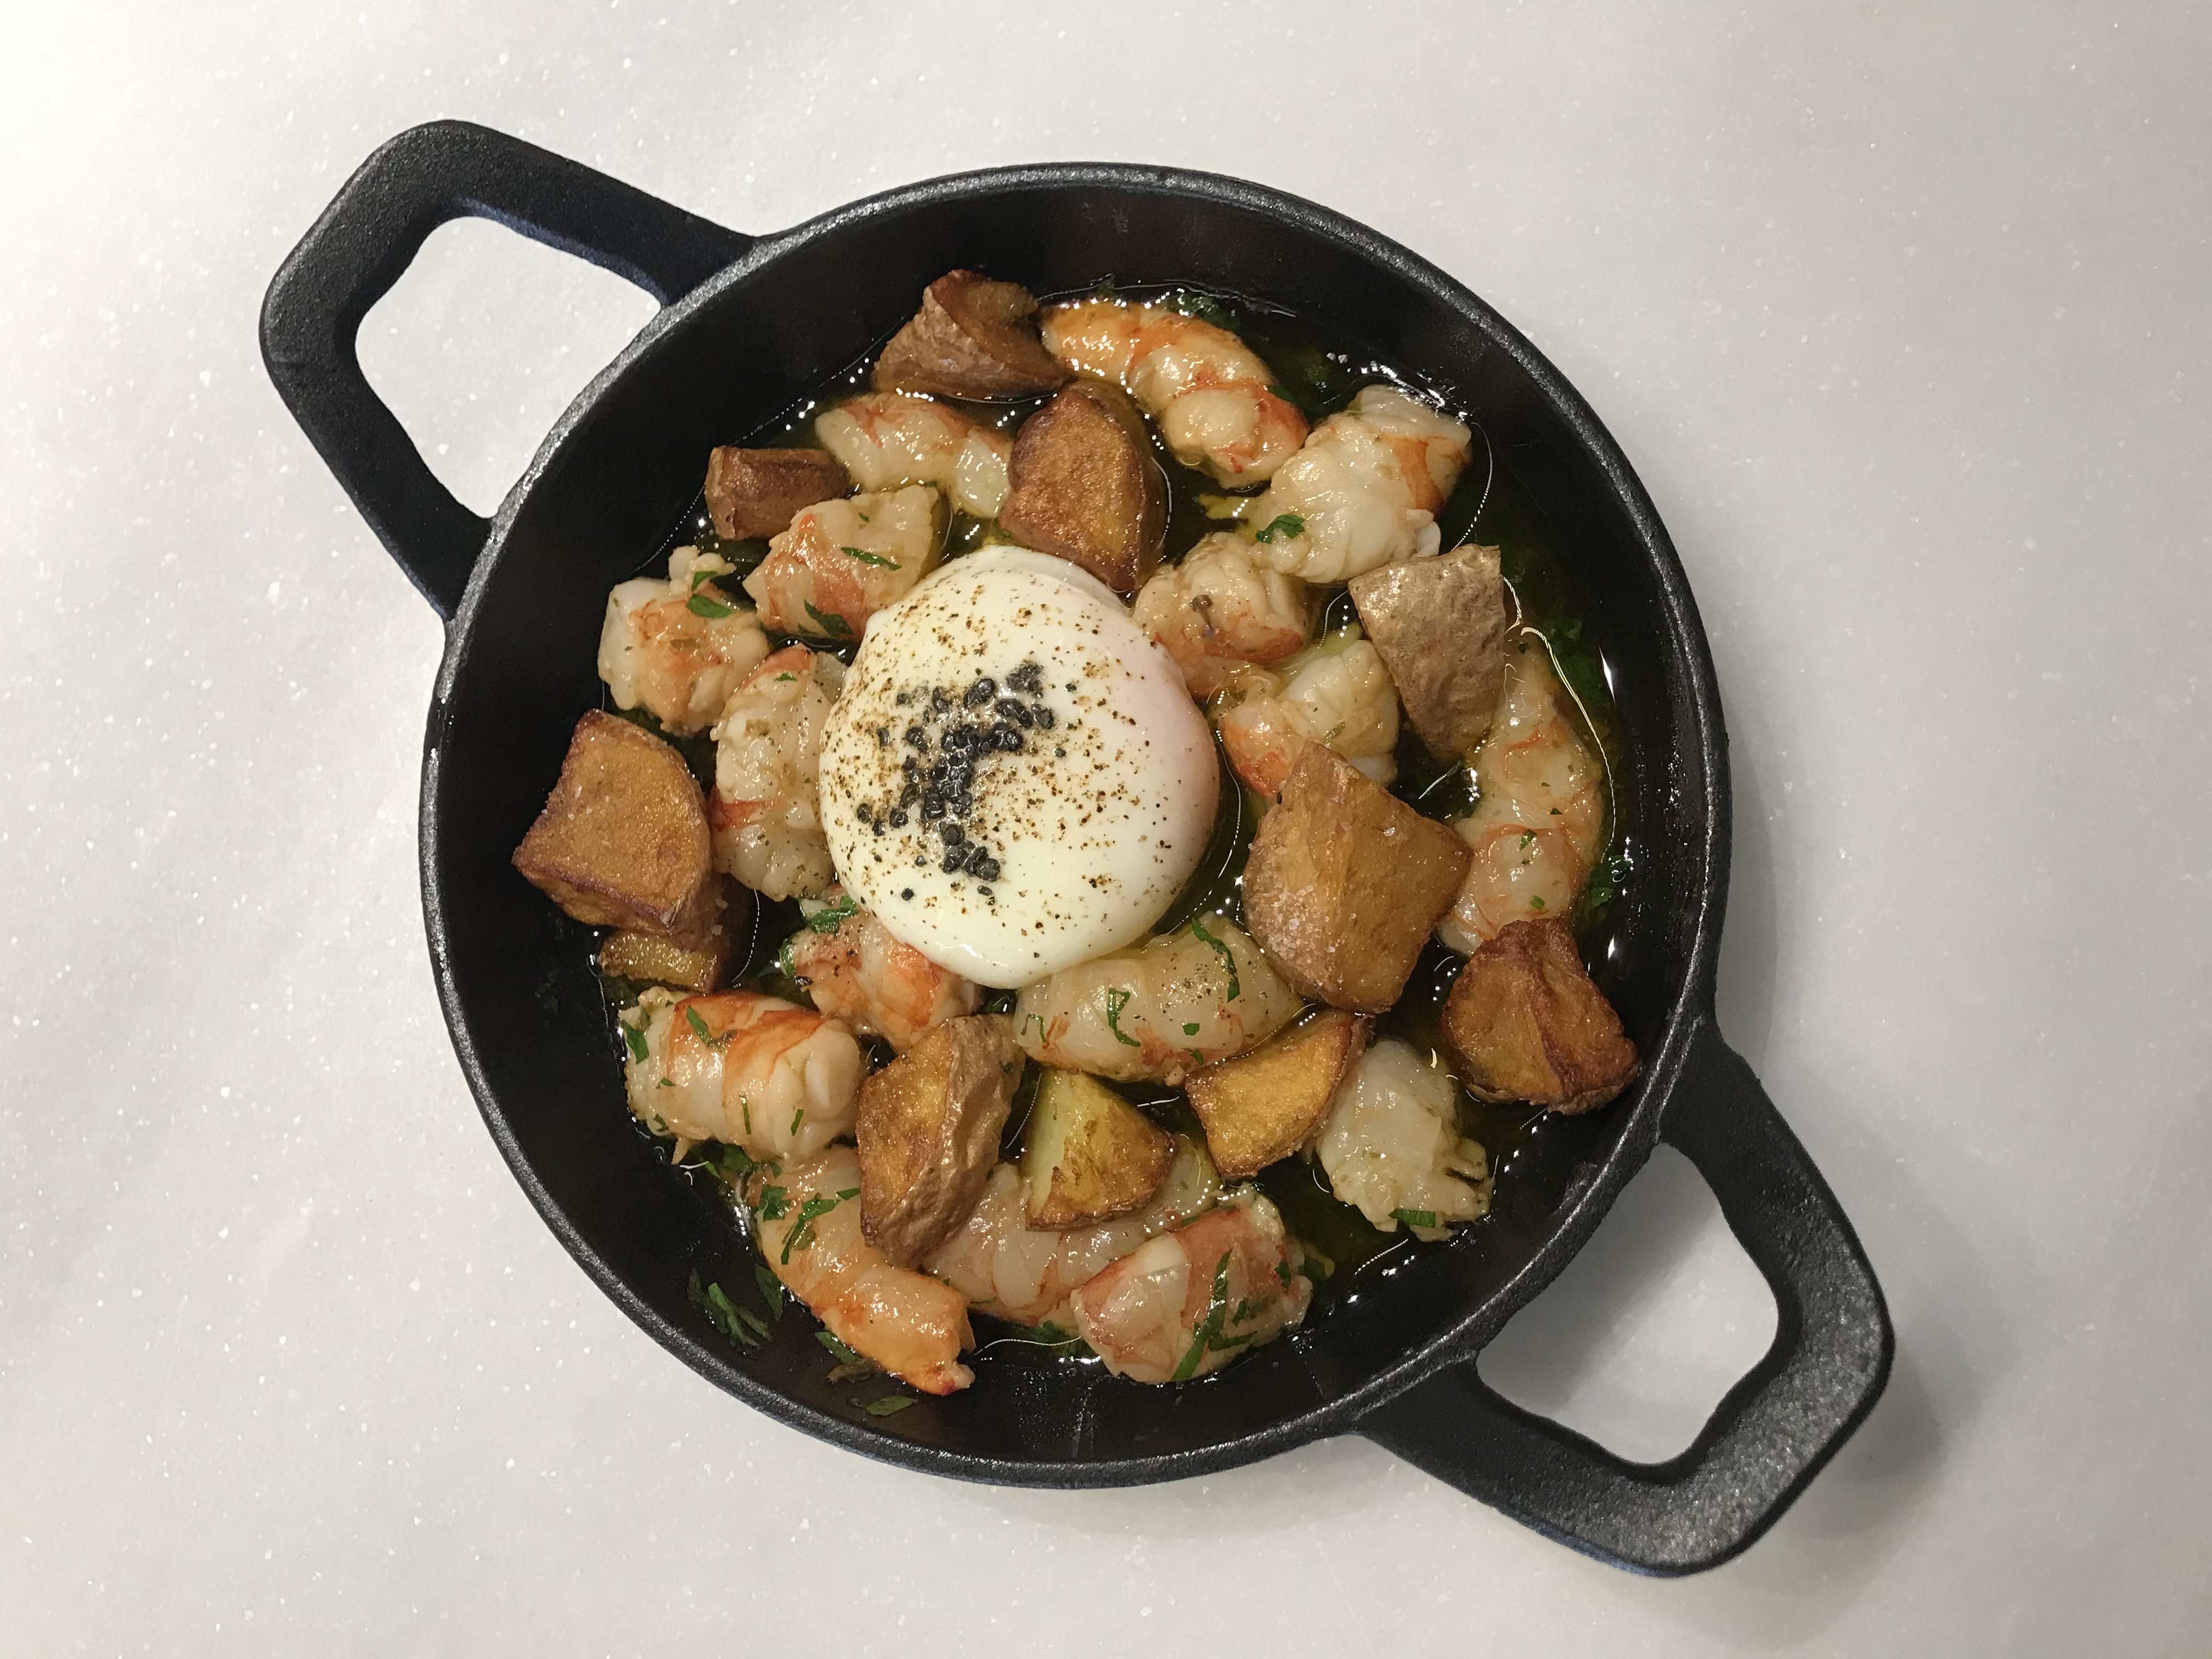 Prawns cooked with garlic-Nikkei style with potatoes and fried egg